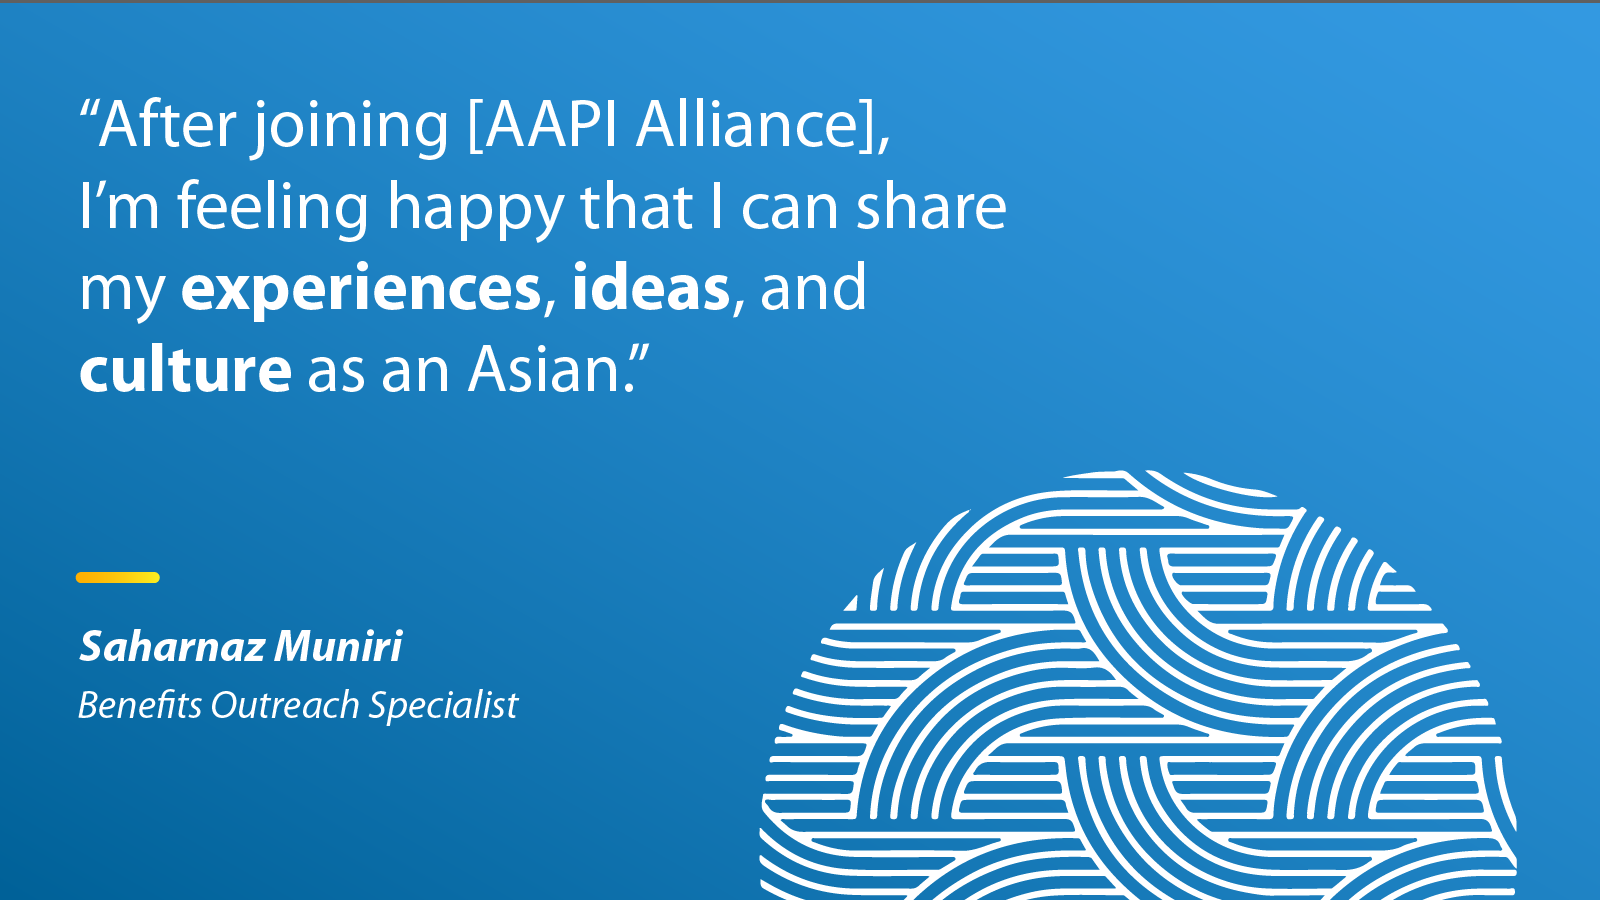 "After joining [AAPI Alliance], I'm feeling happy that I can share my experiences, ideas, and culture as an Asian." - Saharanaz Muniri, Benefits Outreach Specialist